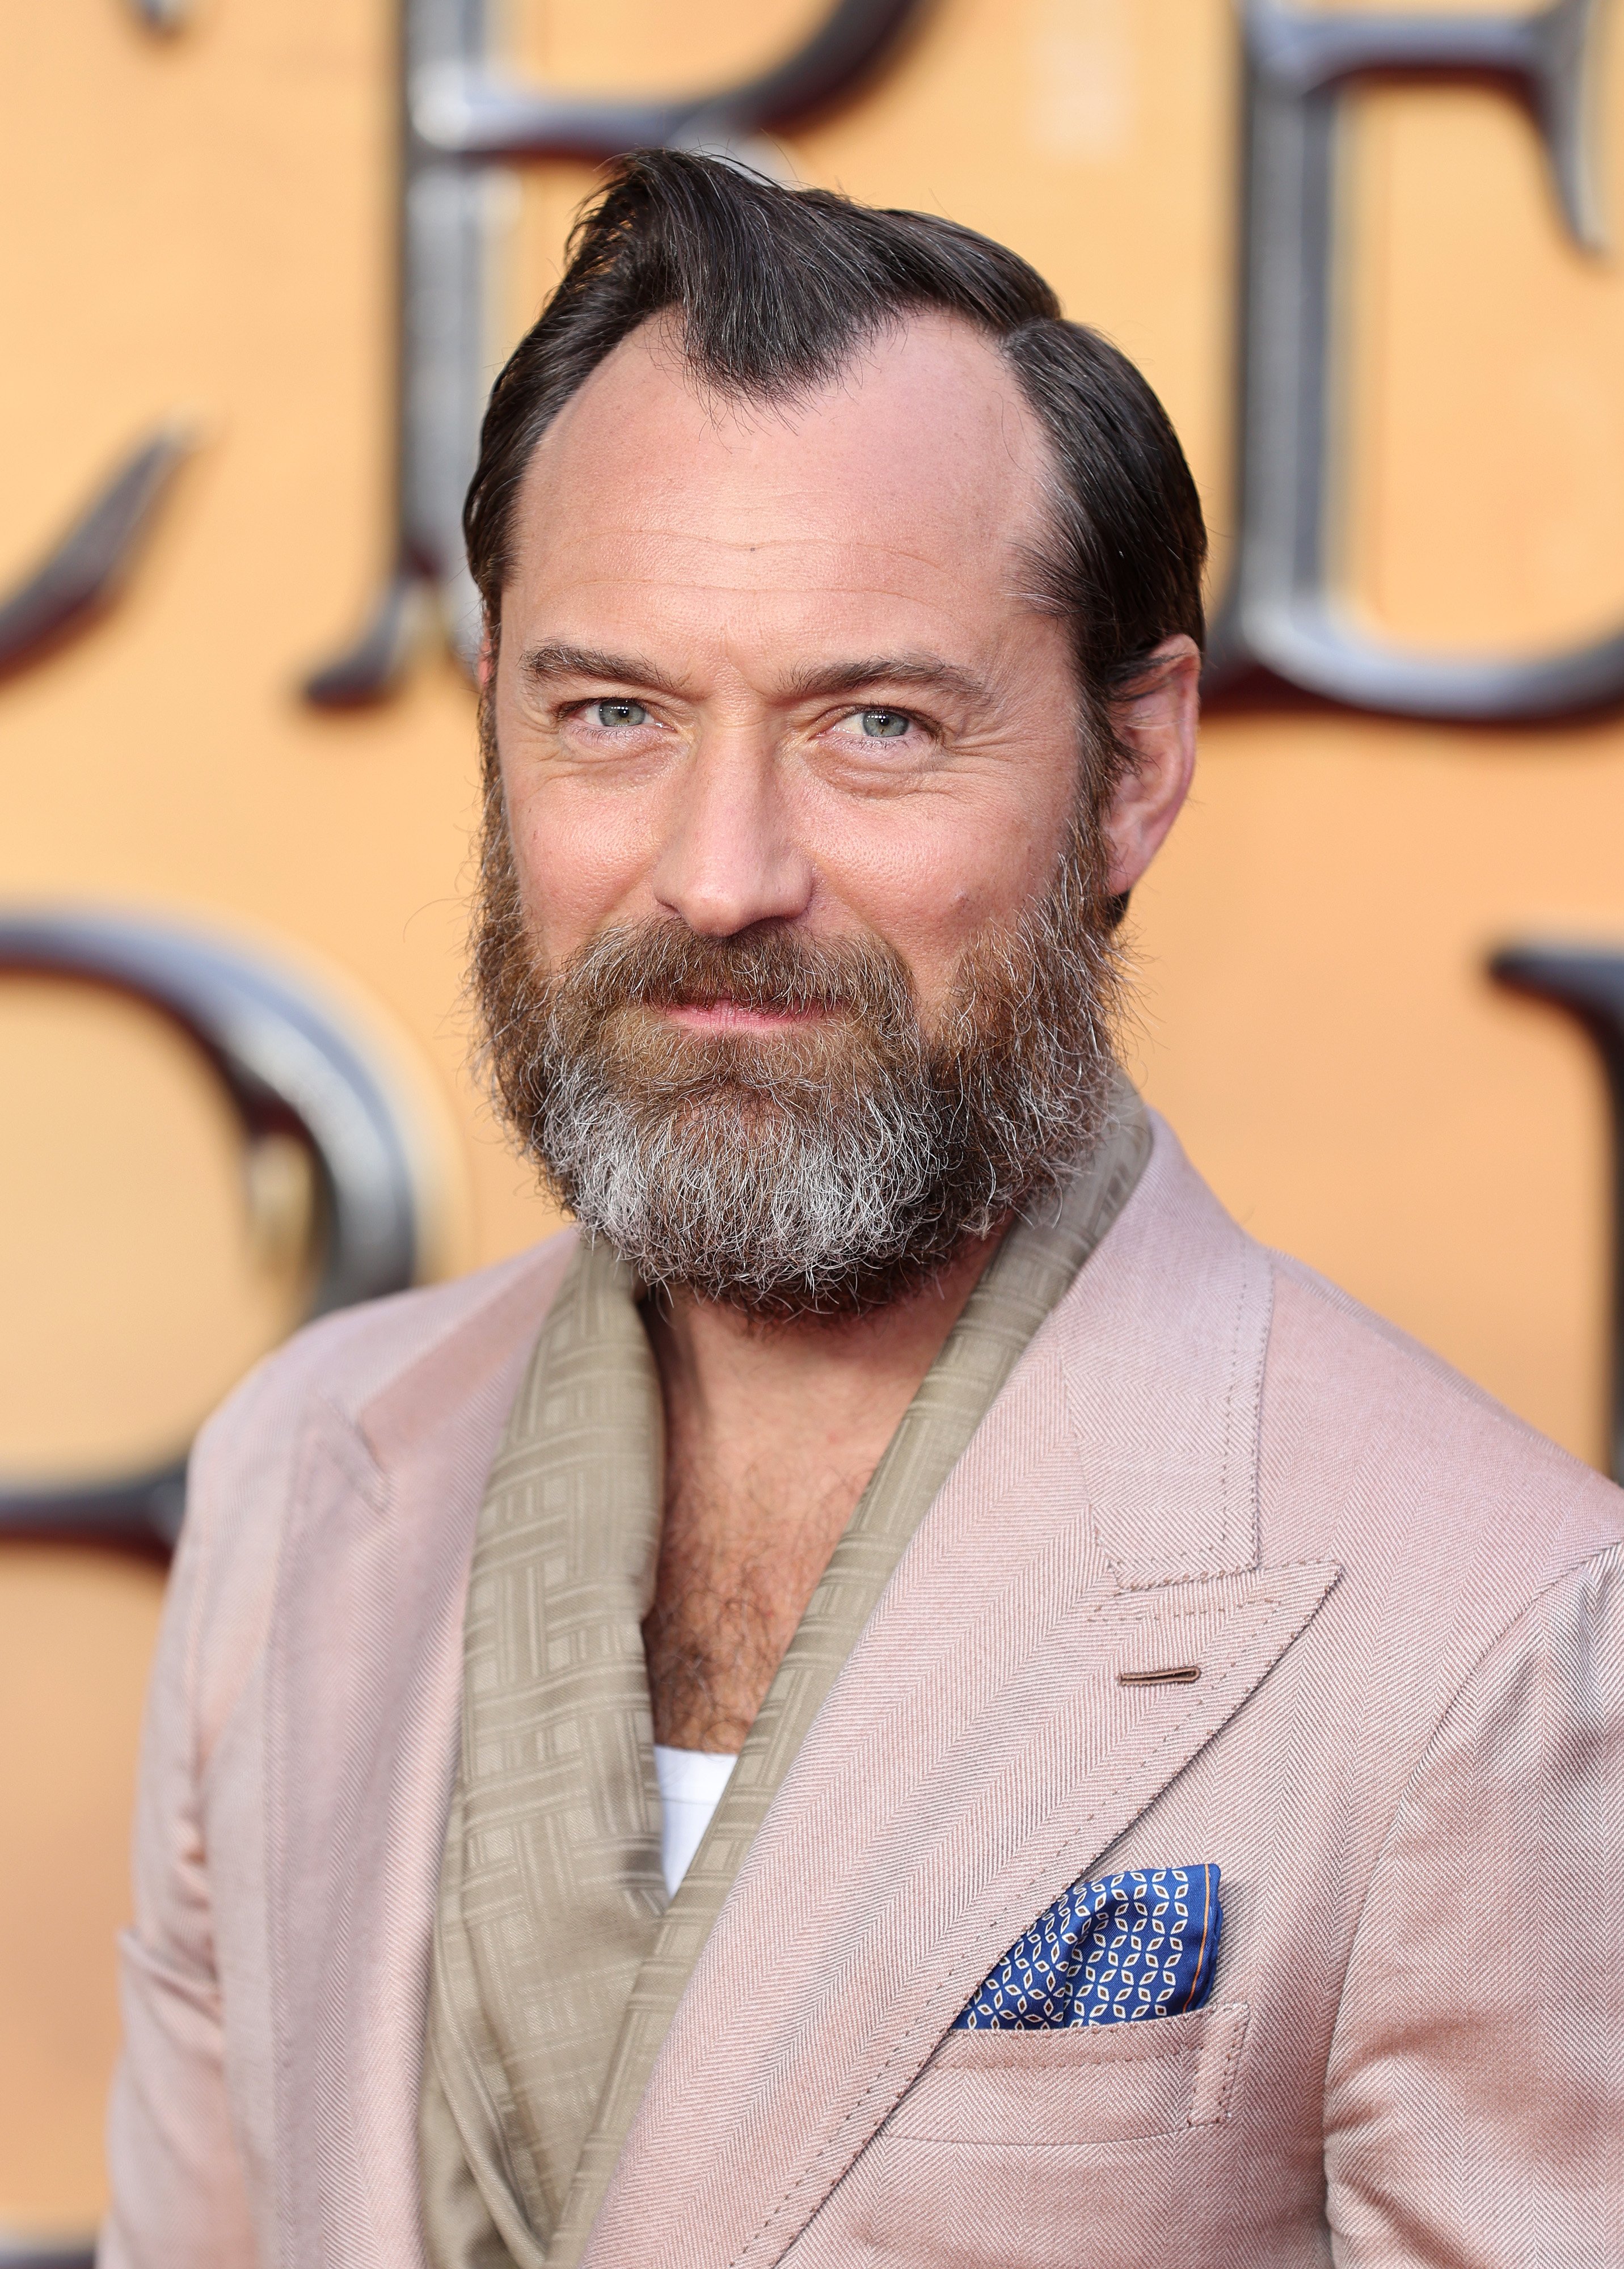 Jude Law at the premiere of "Fantastic Beasts: The Secrets of Dumbledore" on March 29, 2022, in London | Source: Getty Images